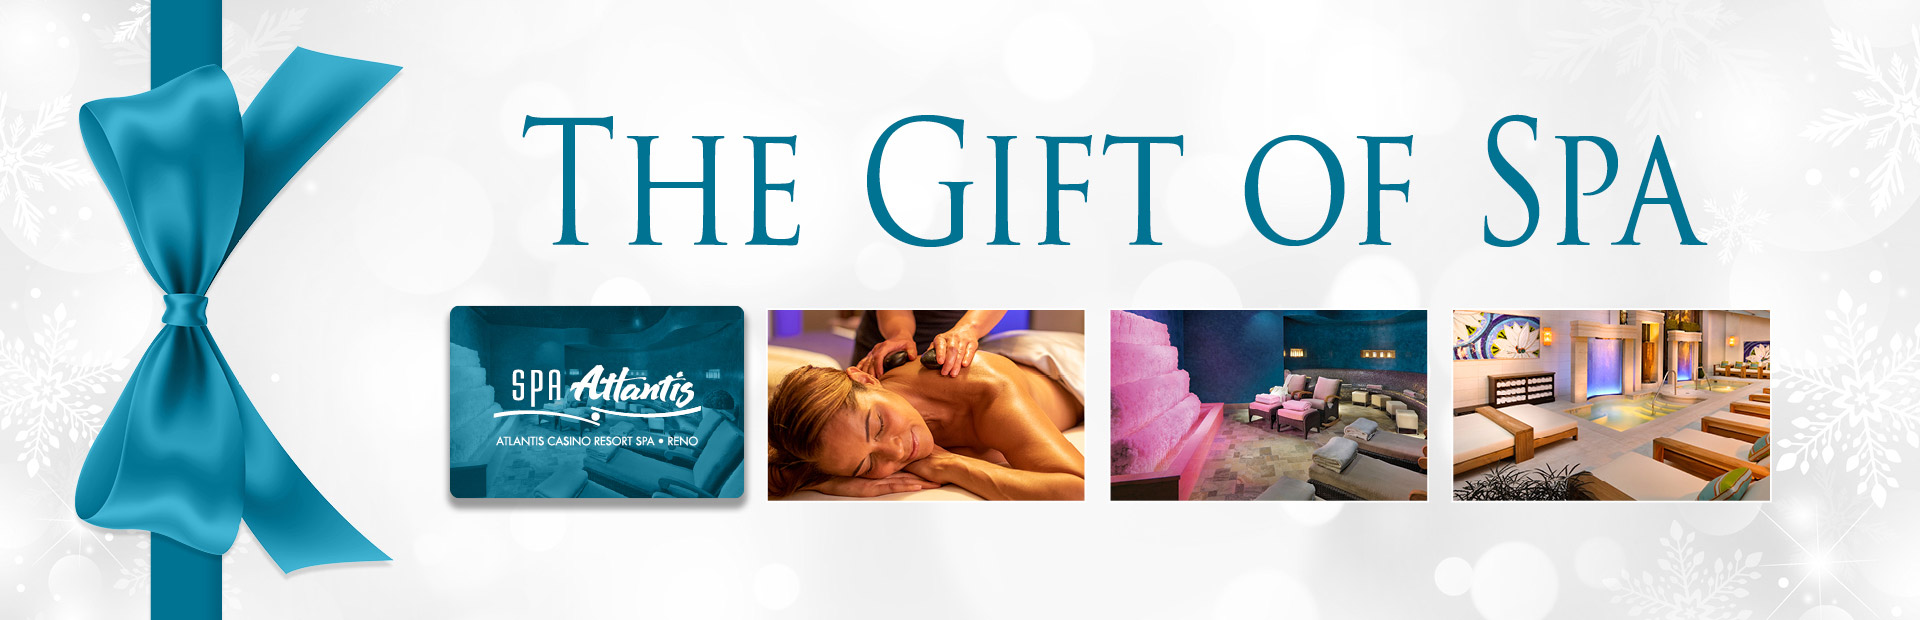 The Gift of Spa